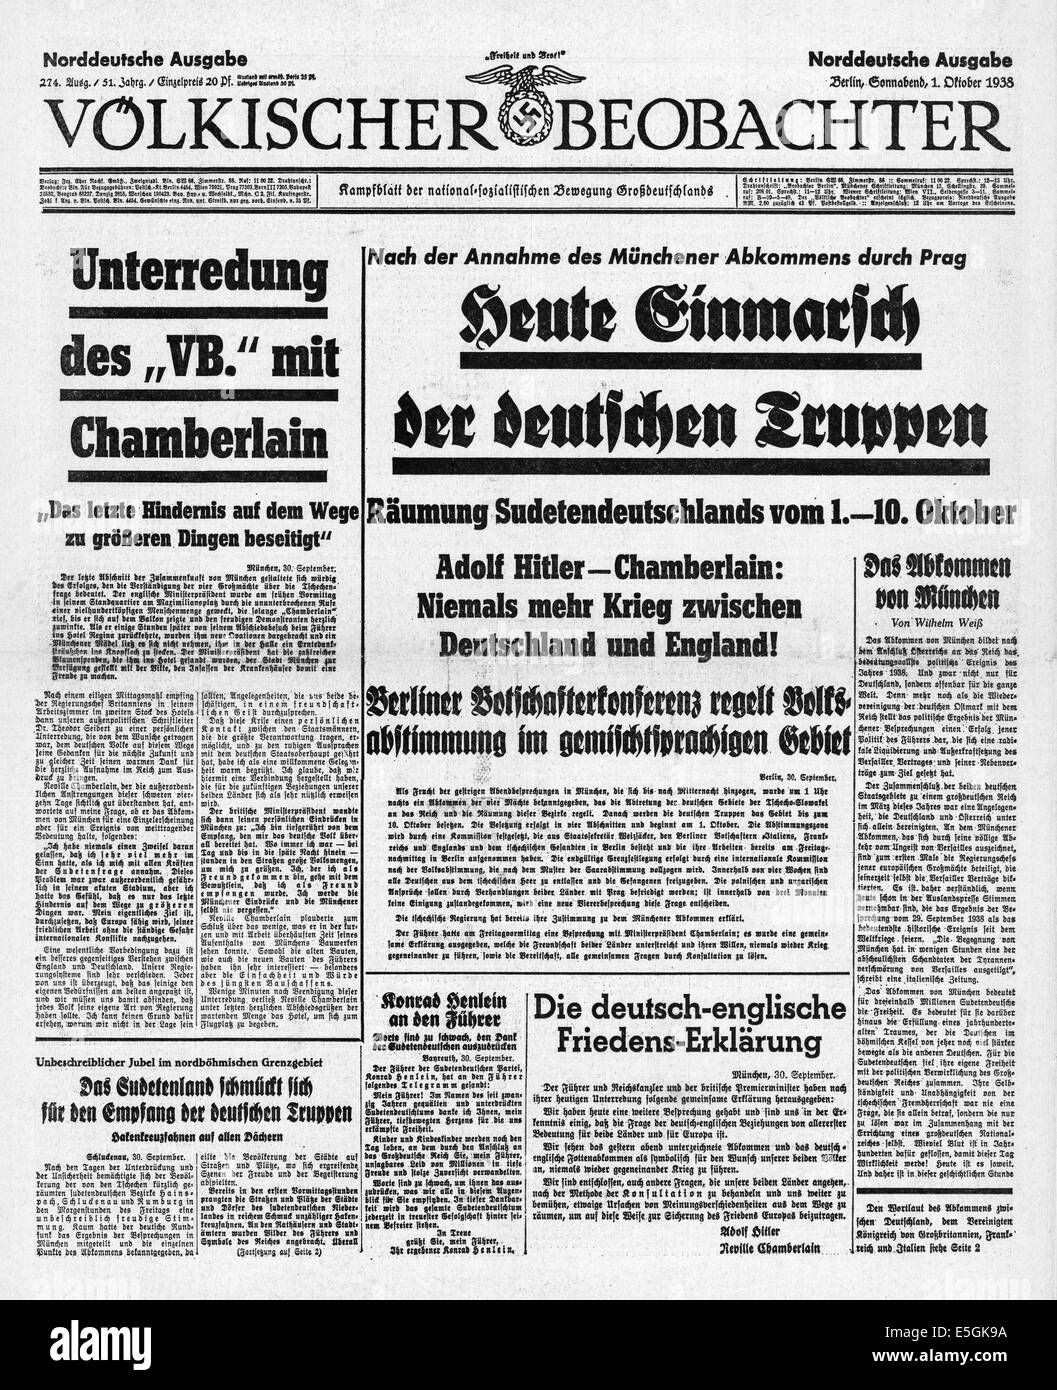 1923 Völkischer Beobachter (Germany) front page reporting the Munich Putsch falsely stating it a success and that Erich Ludendorff and Adolf Hitler had taken over the Bavarian government Stock Photo